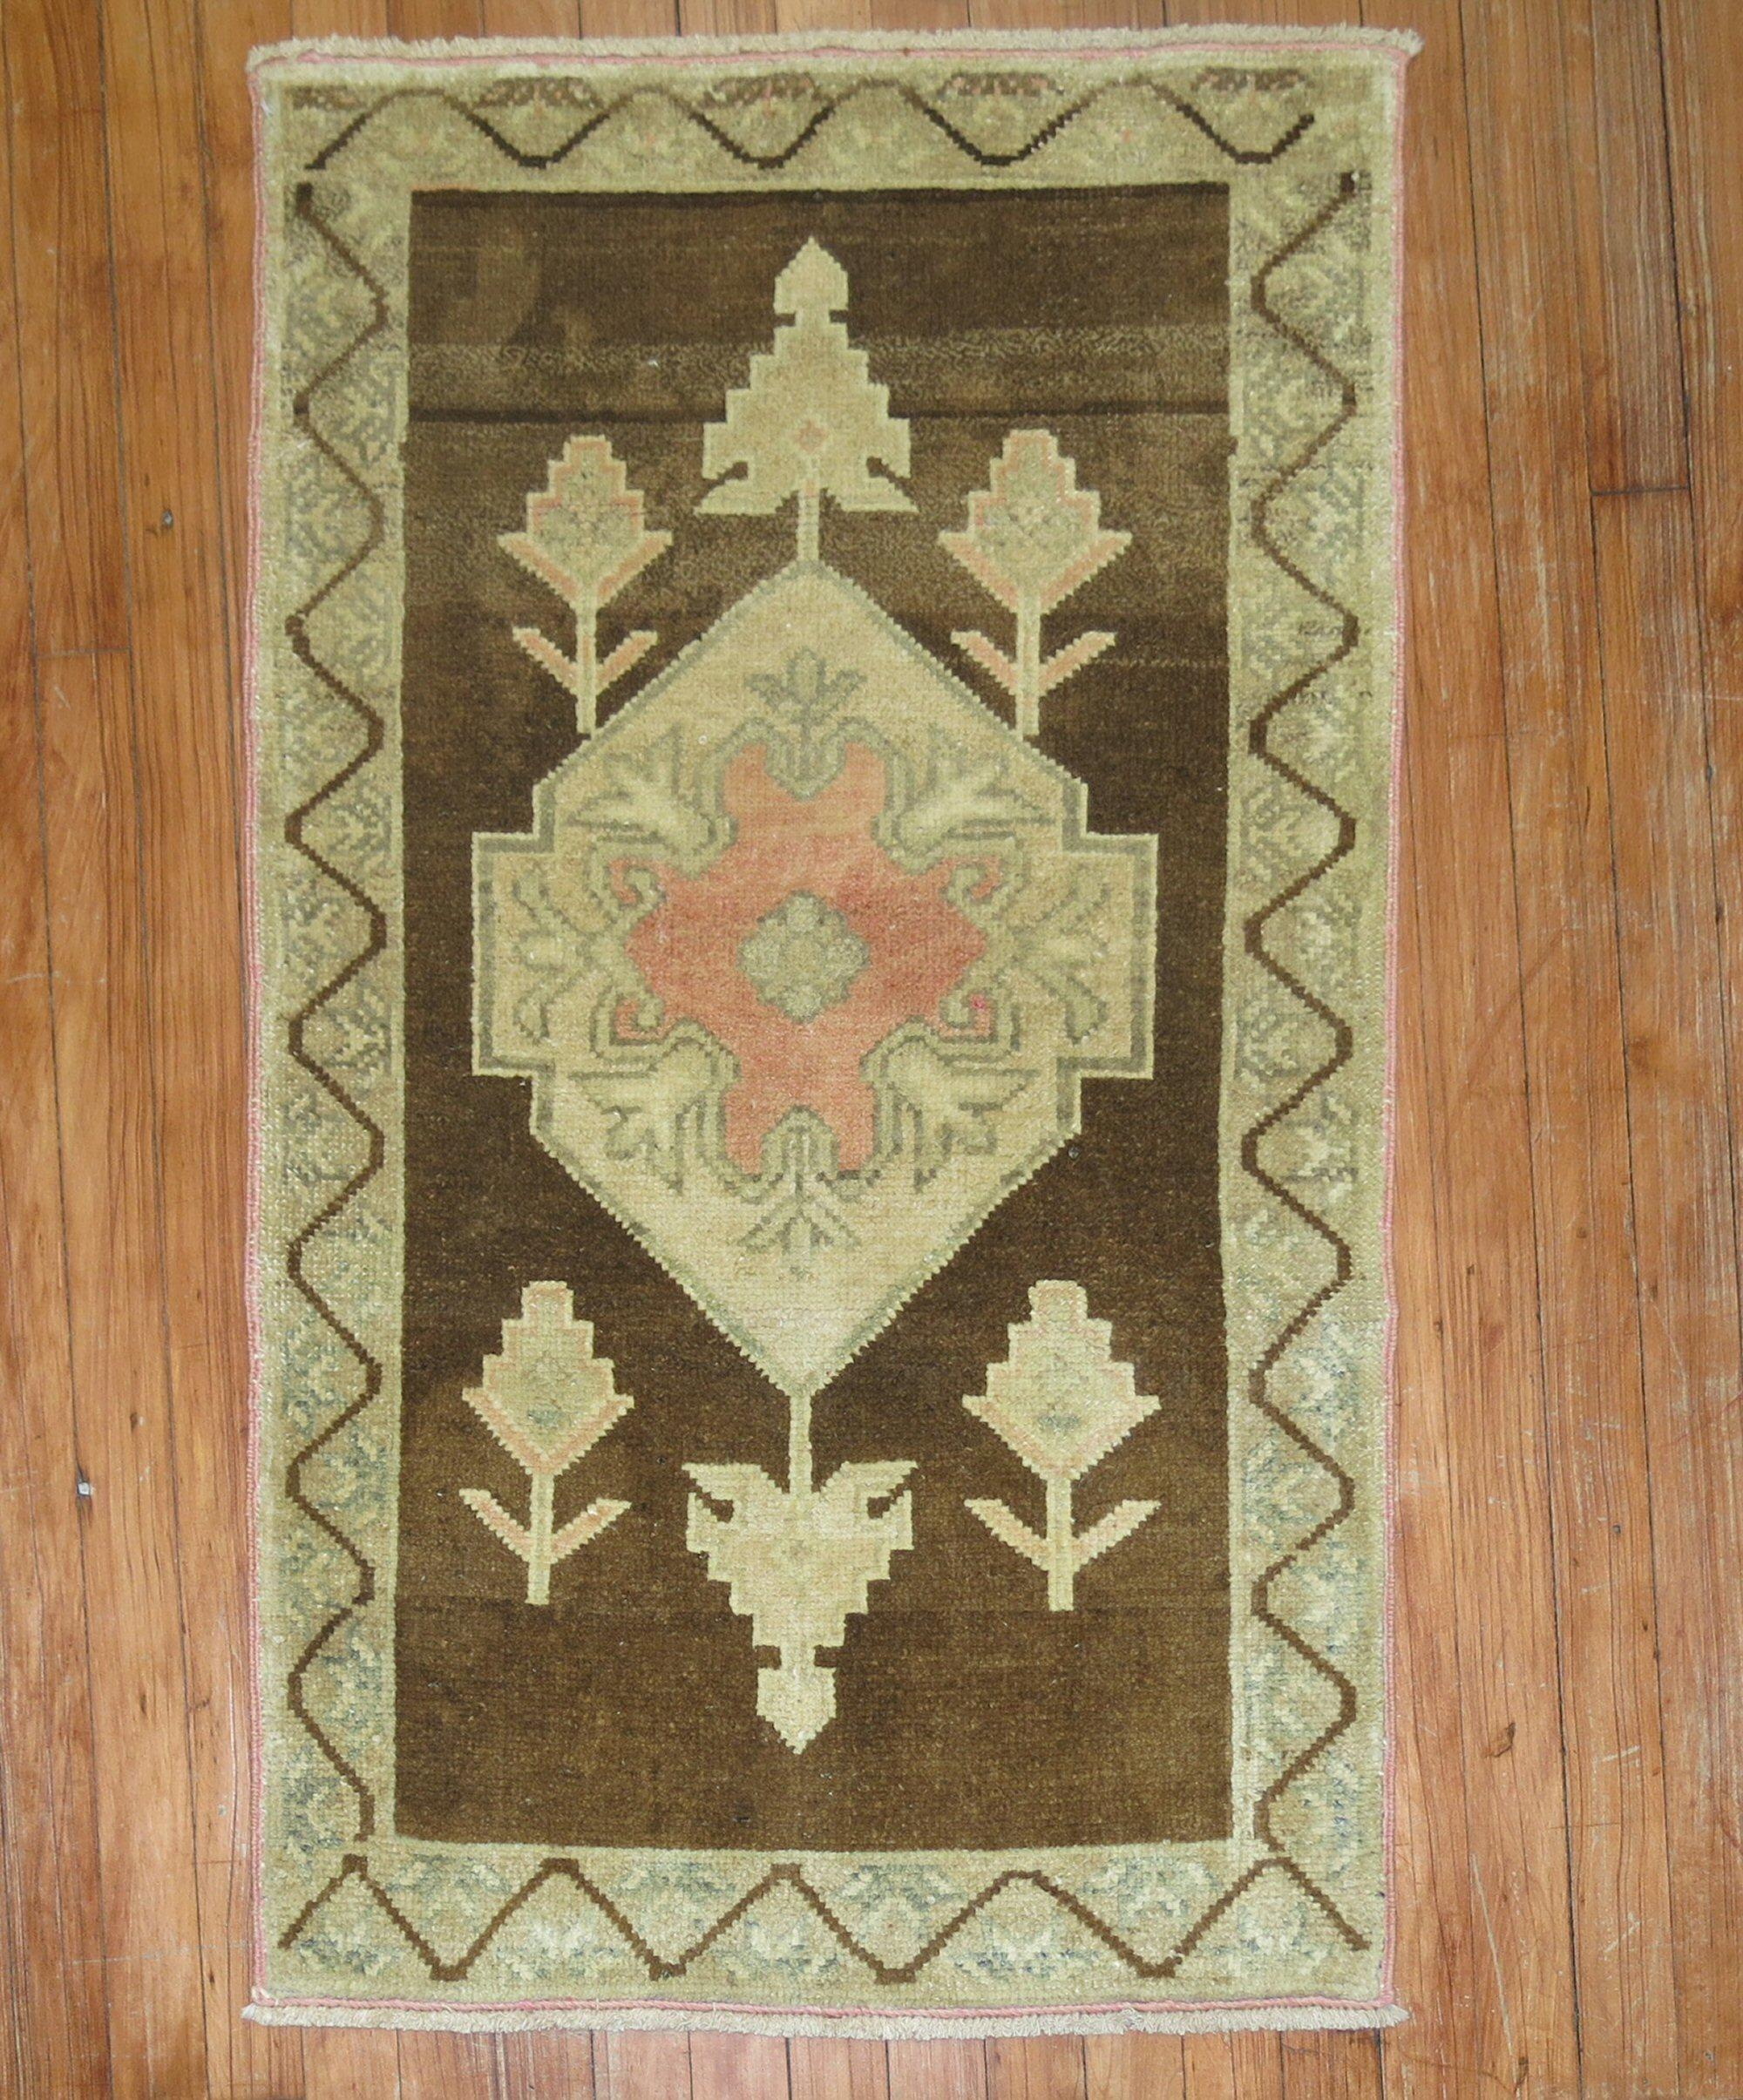 Mid 20th century Turkish rug in brown and neutral tones

Measures: 2'3'' x 3'8''.